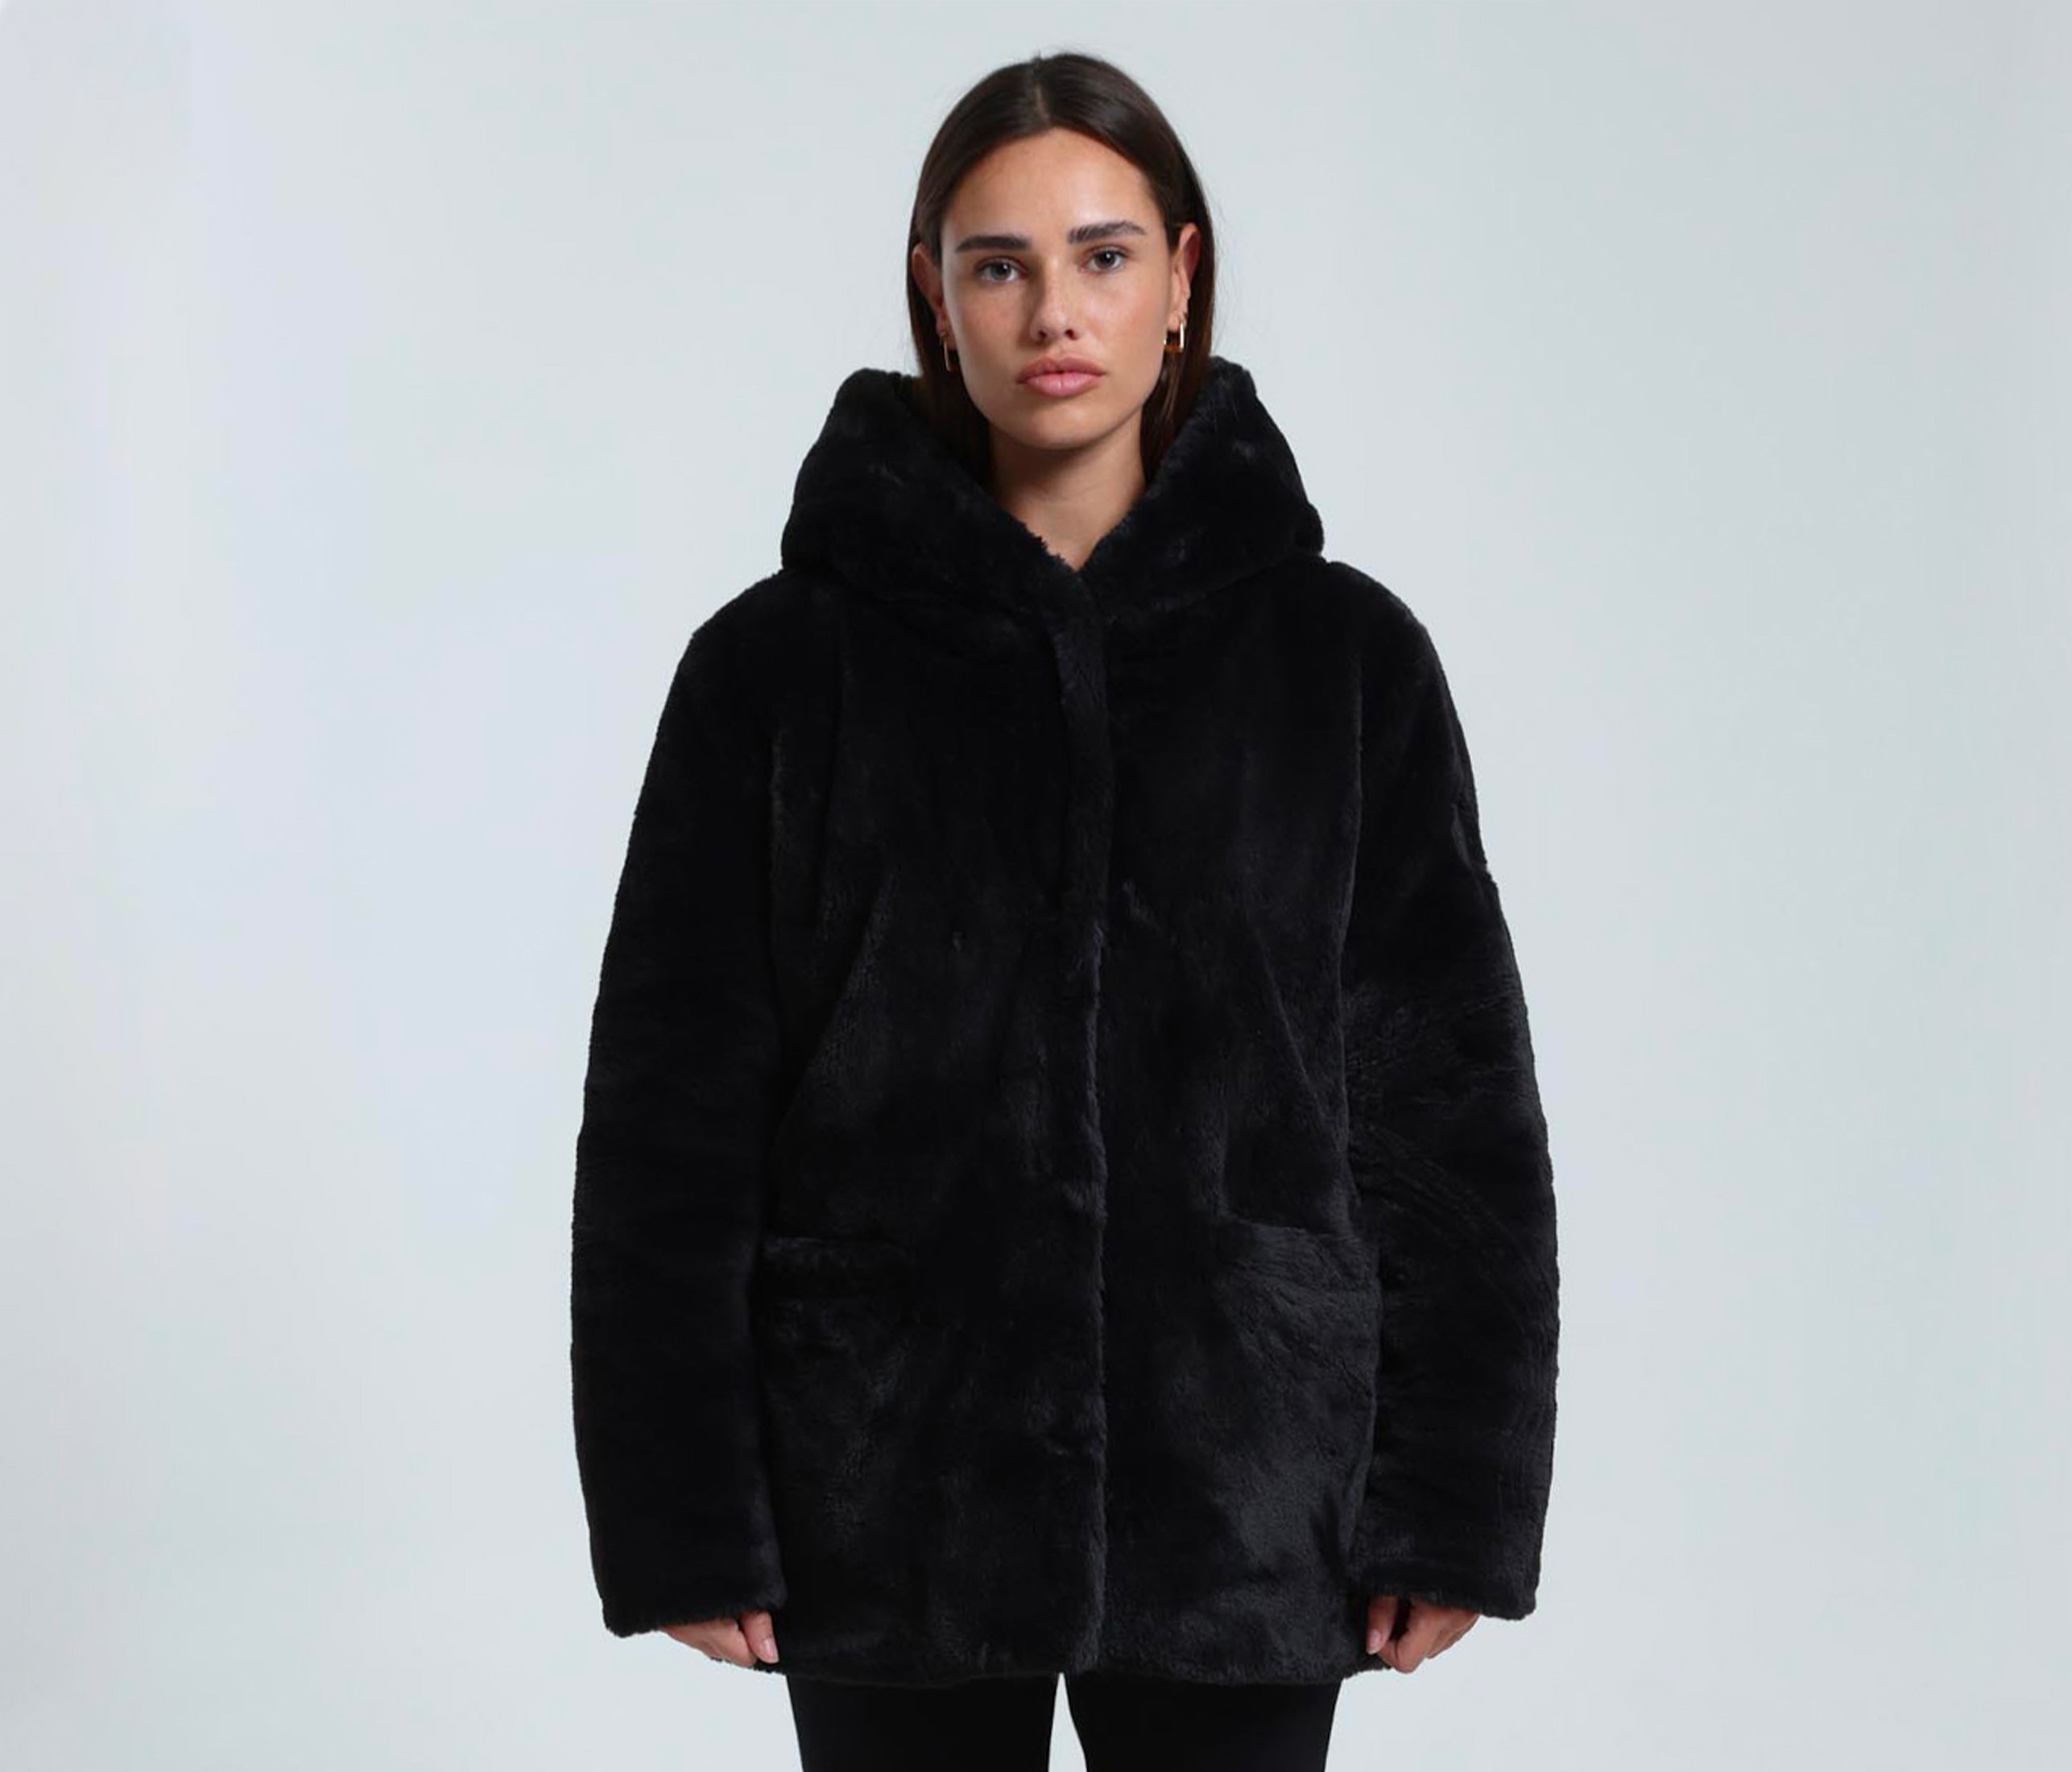 Fortunee synthetic fur coat...